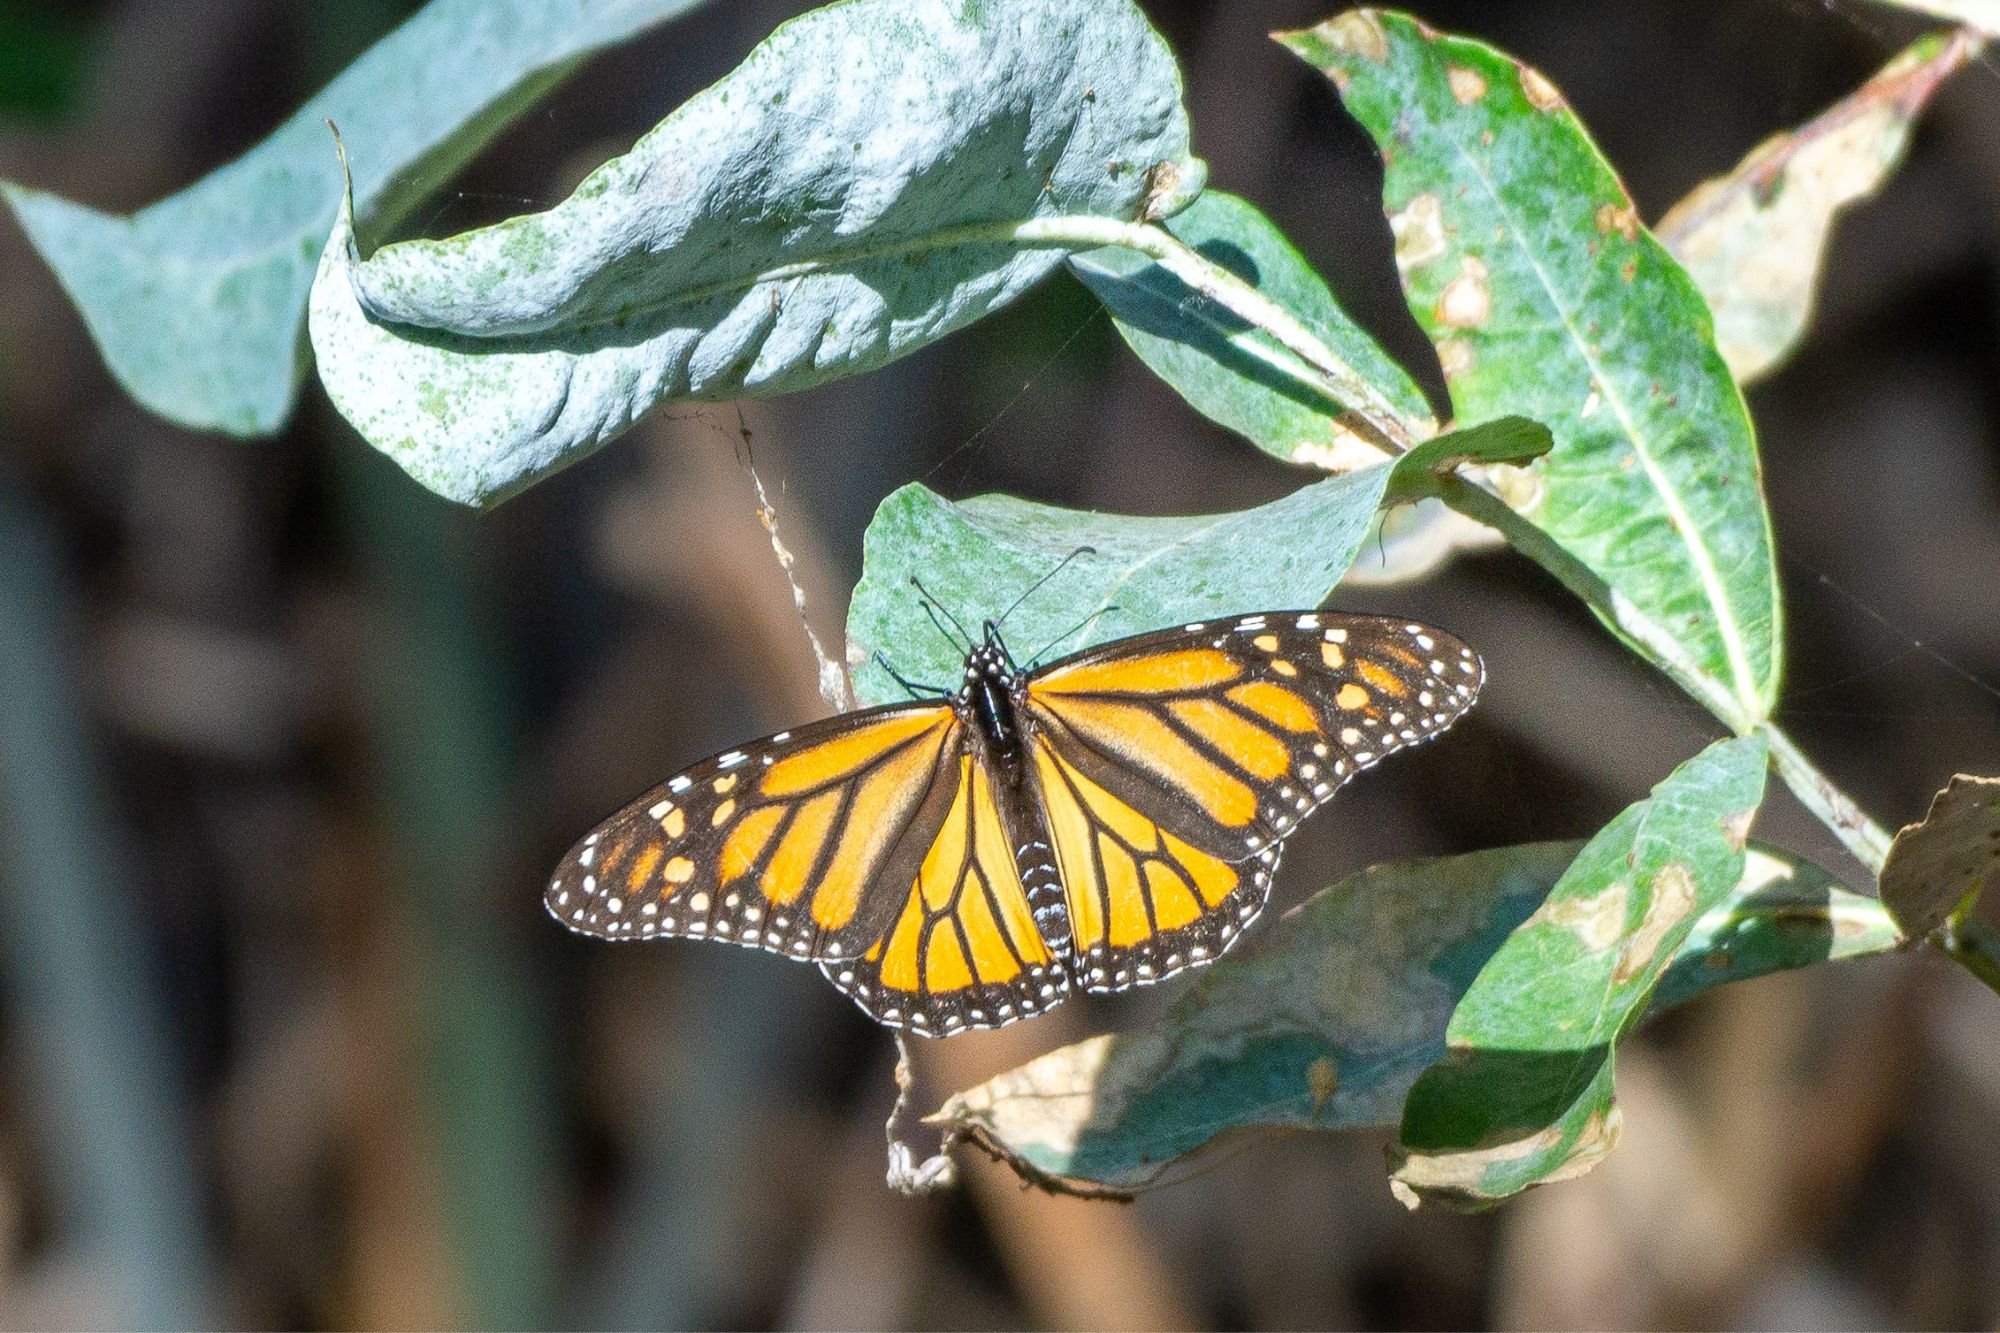 A monarch butterfly with its wings full spread out in the sun.